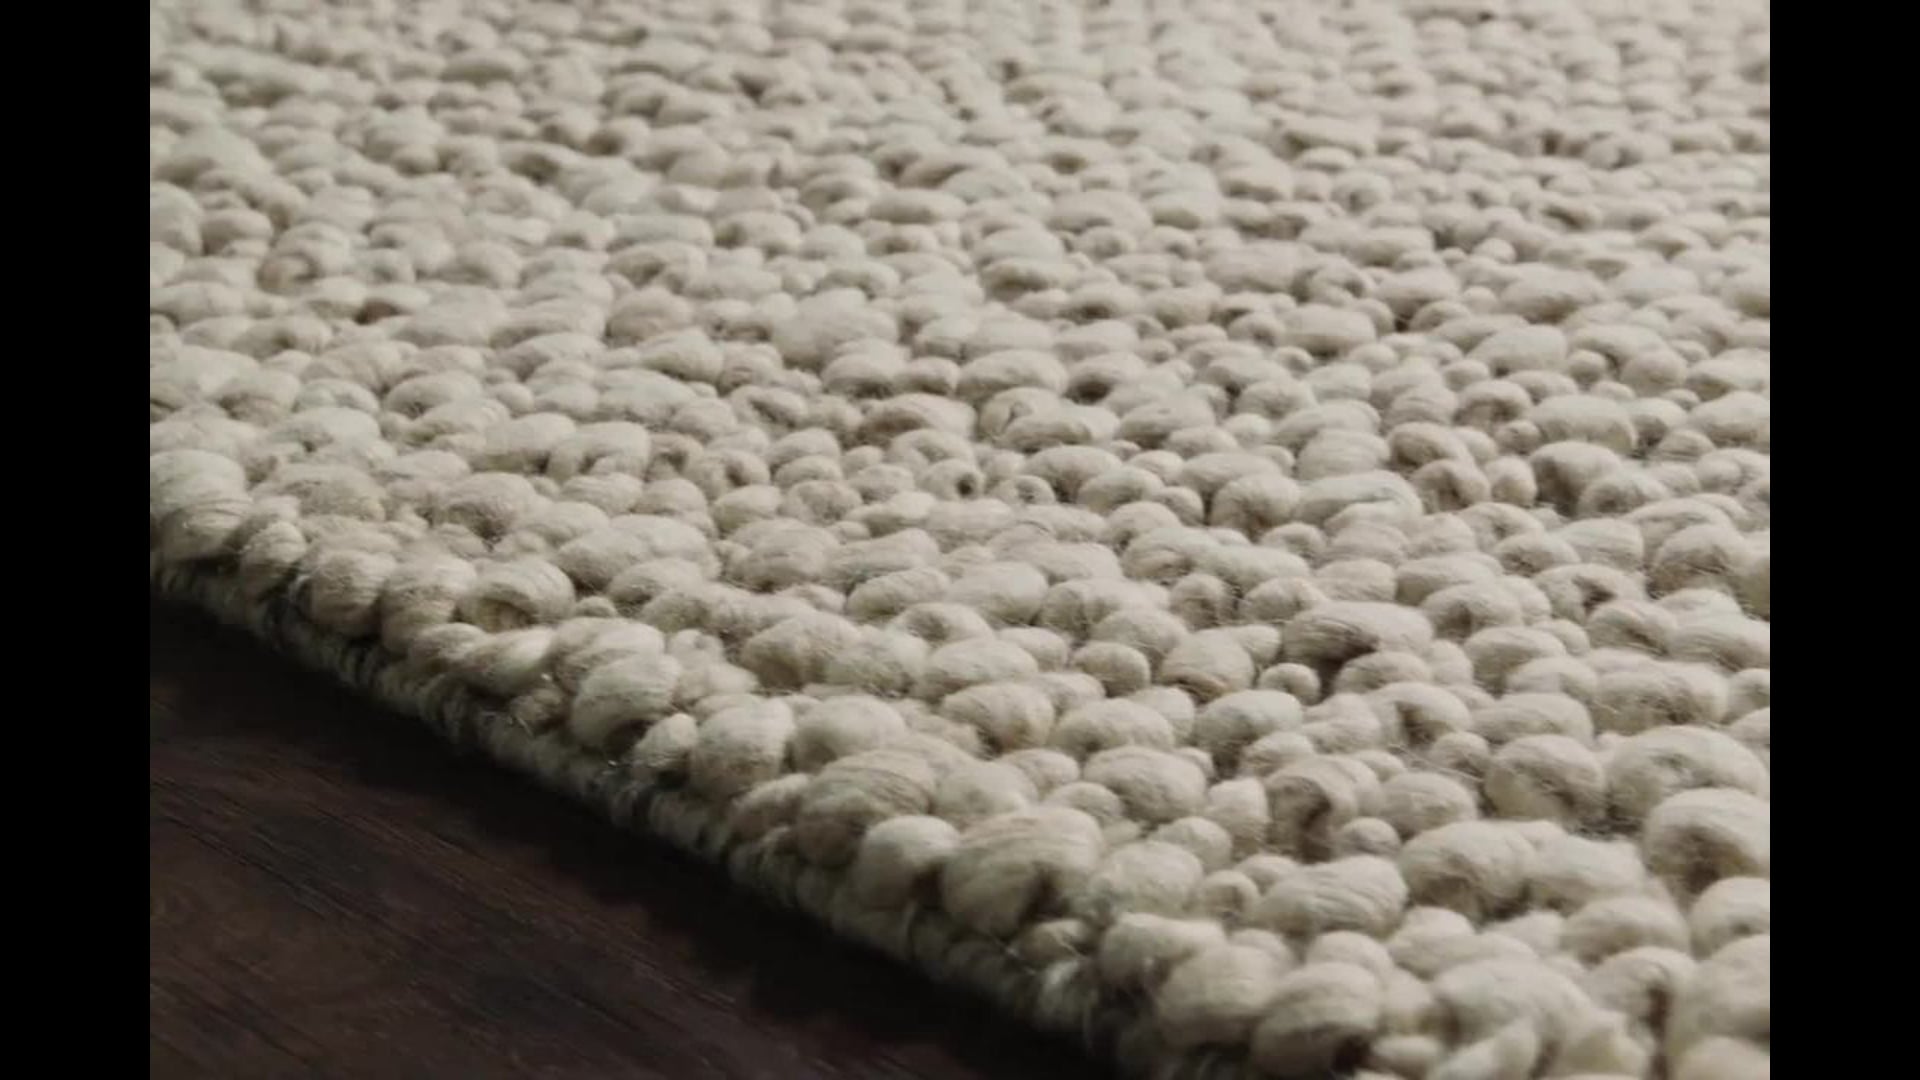 Handwoven Wool Textured Quarry QU-01 Area Rug by Loloi, Oatmeal, 5'0"x7'6"